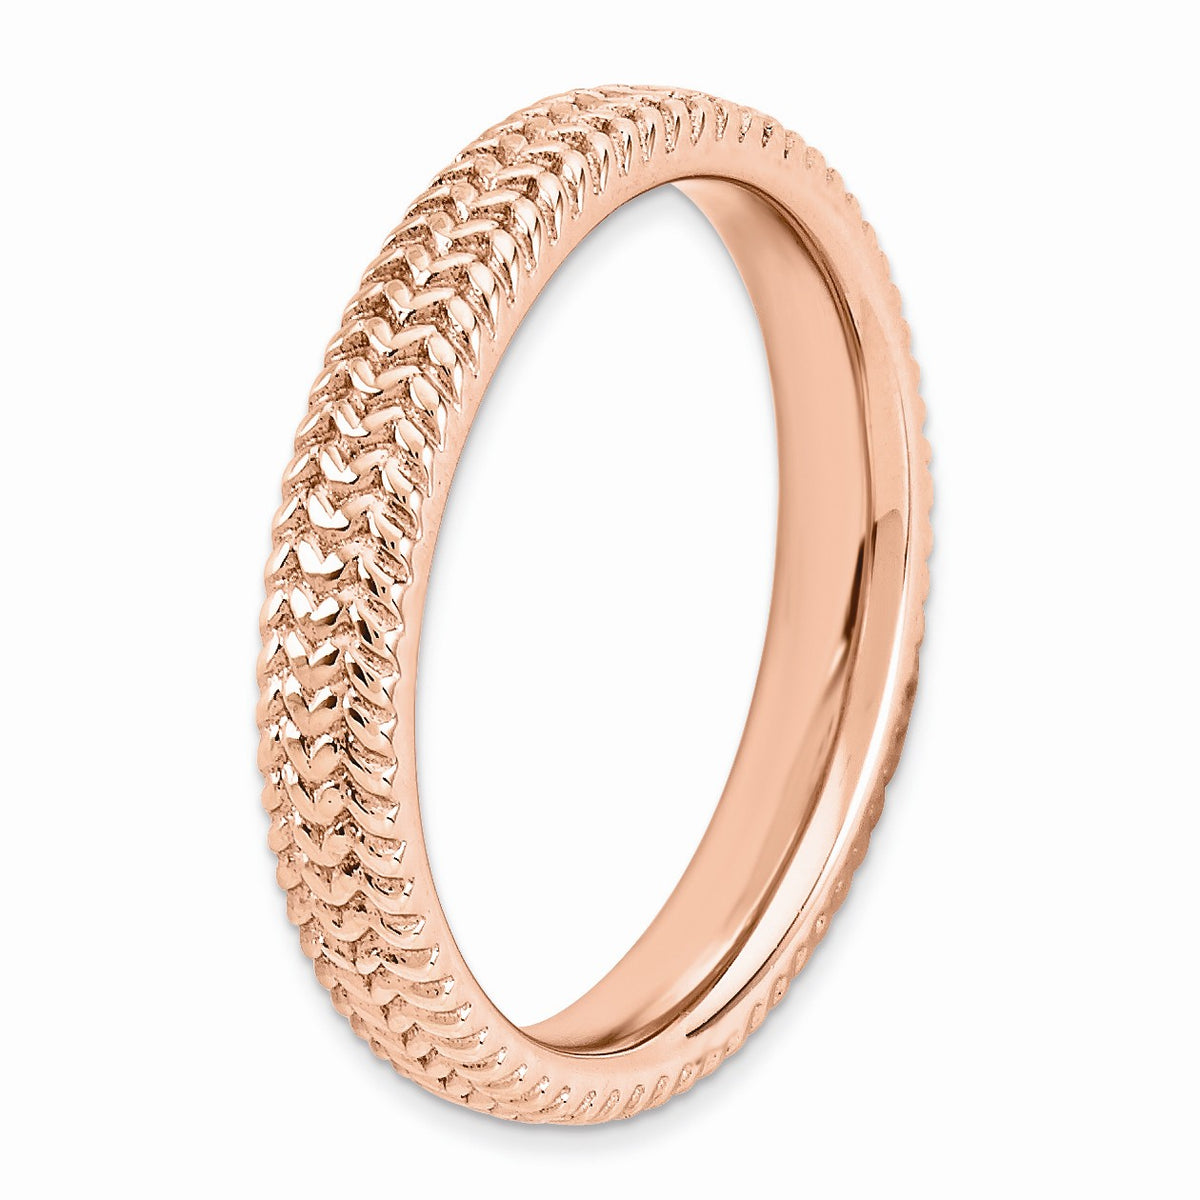 Alternate view of the 3.25mm 14k Rose Plated Sterling Silver Stackable Finely Textured Band by The Black Bow Jewelry Co.